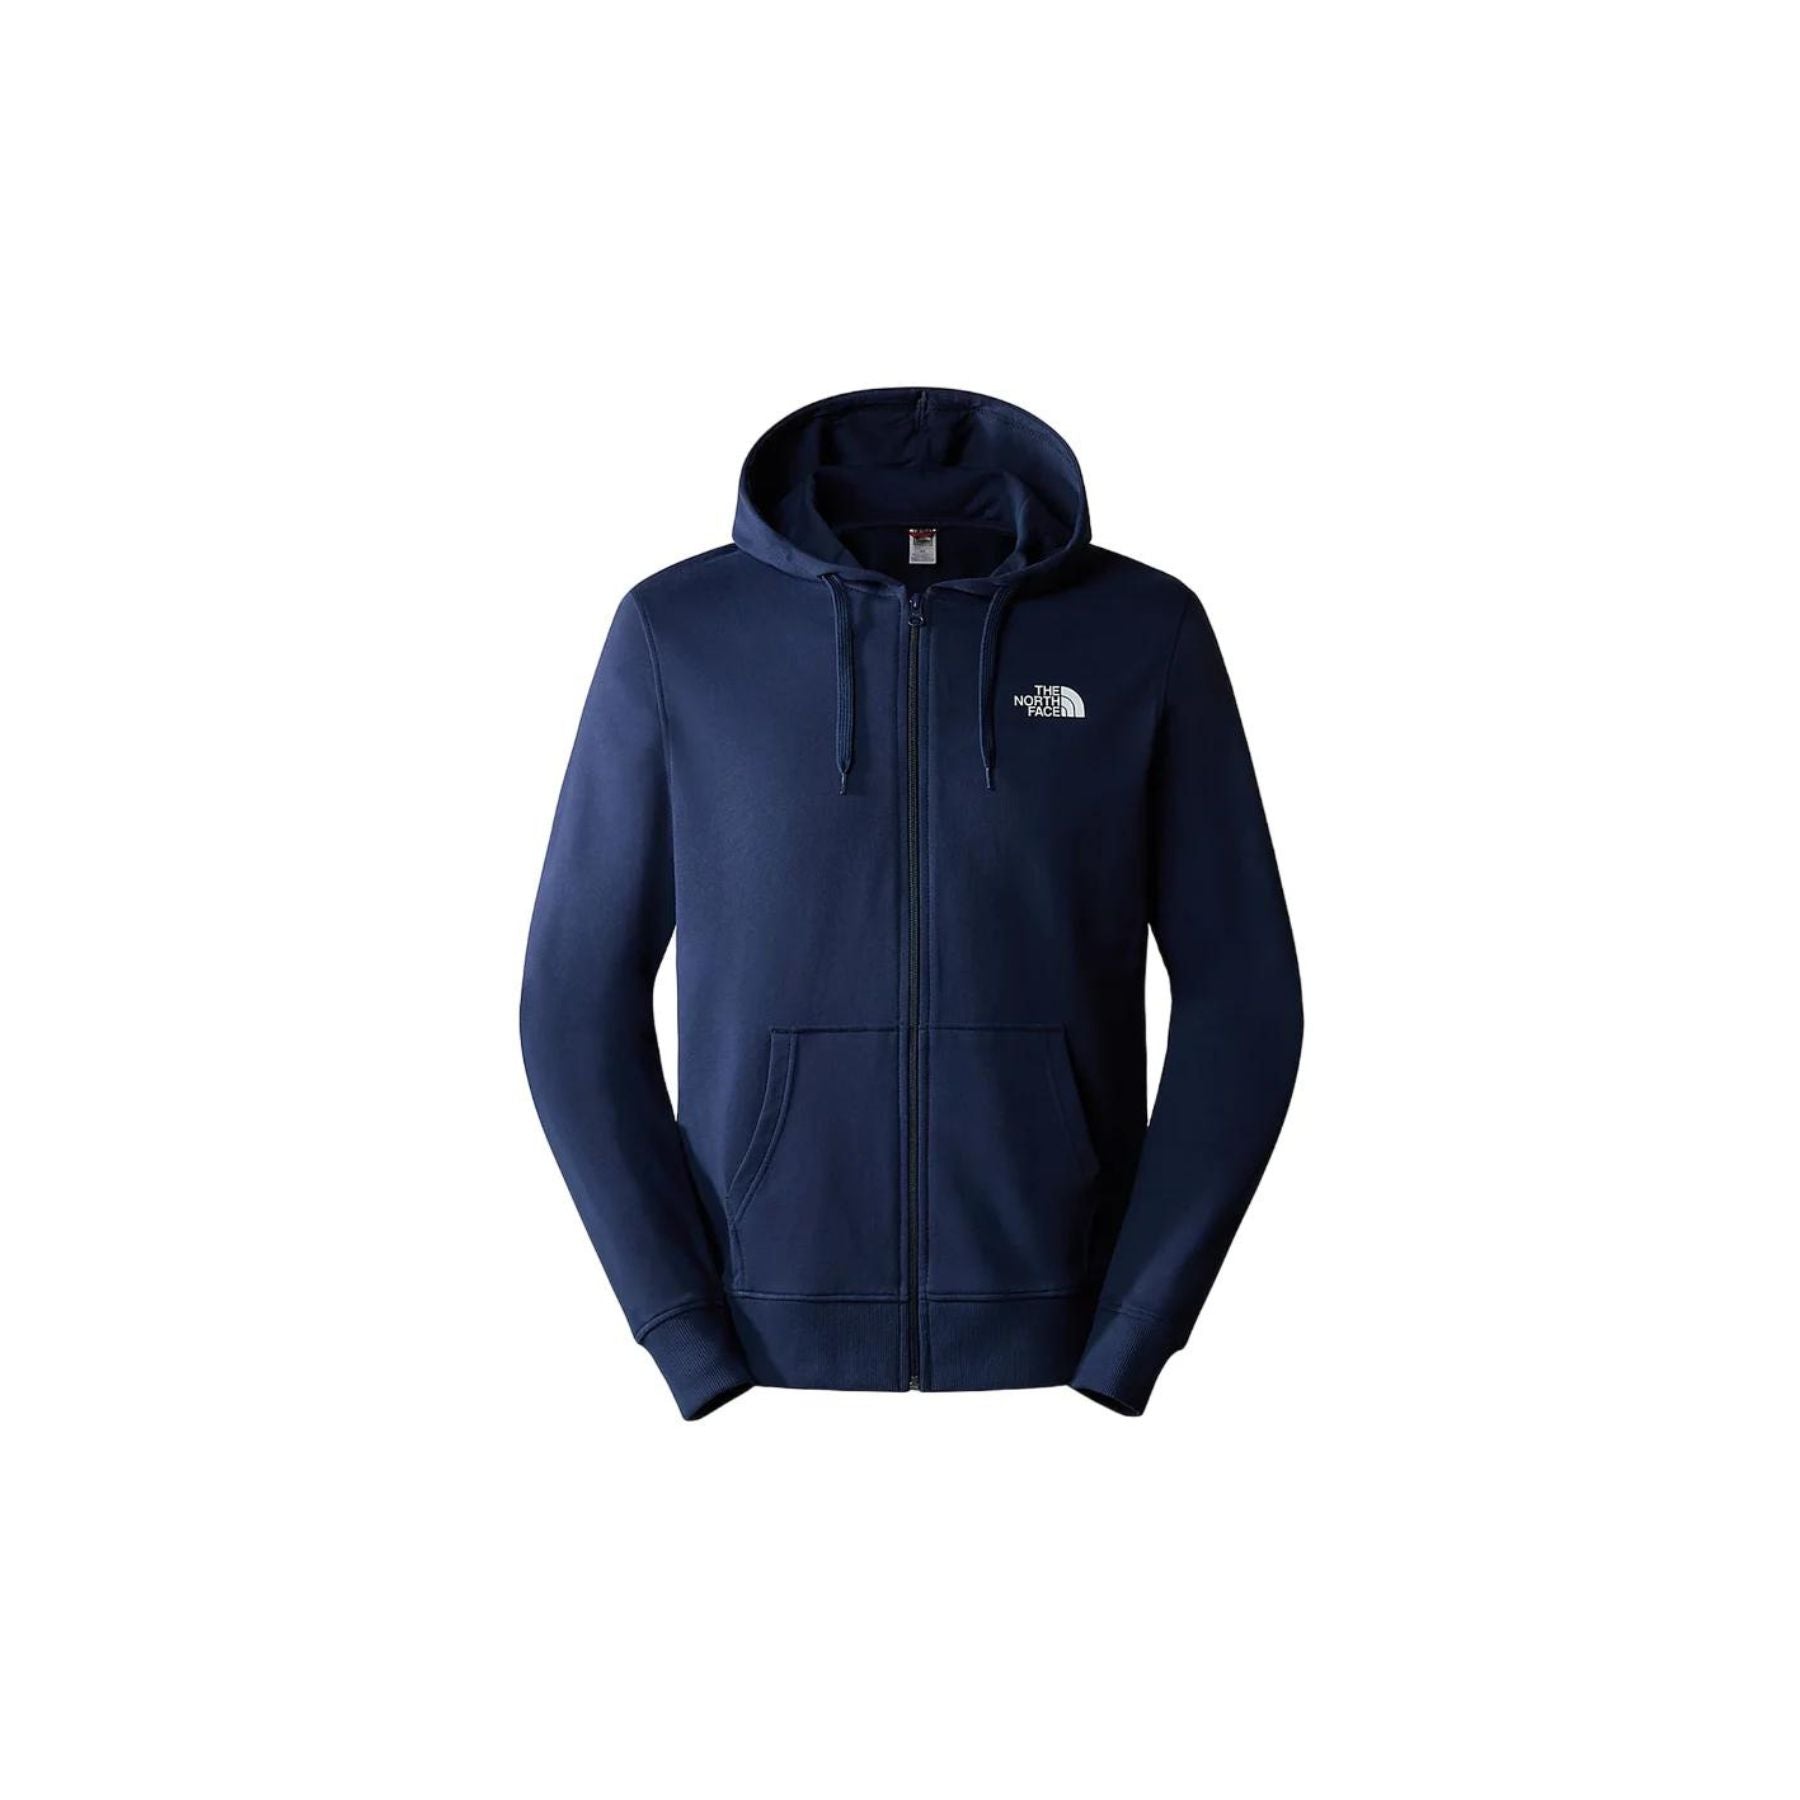 THE NORTH FACE OPEN GATE FZ HOOD M